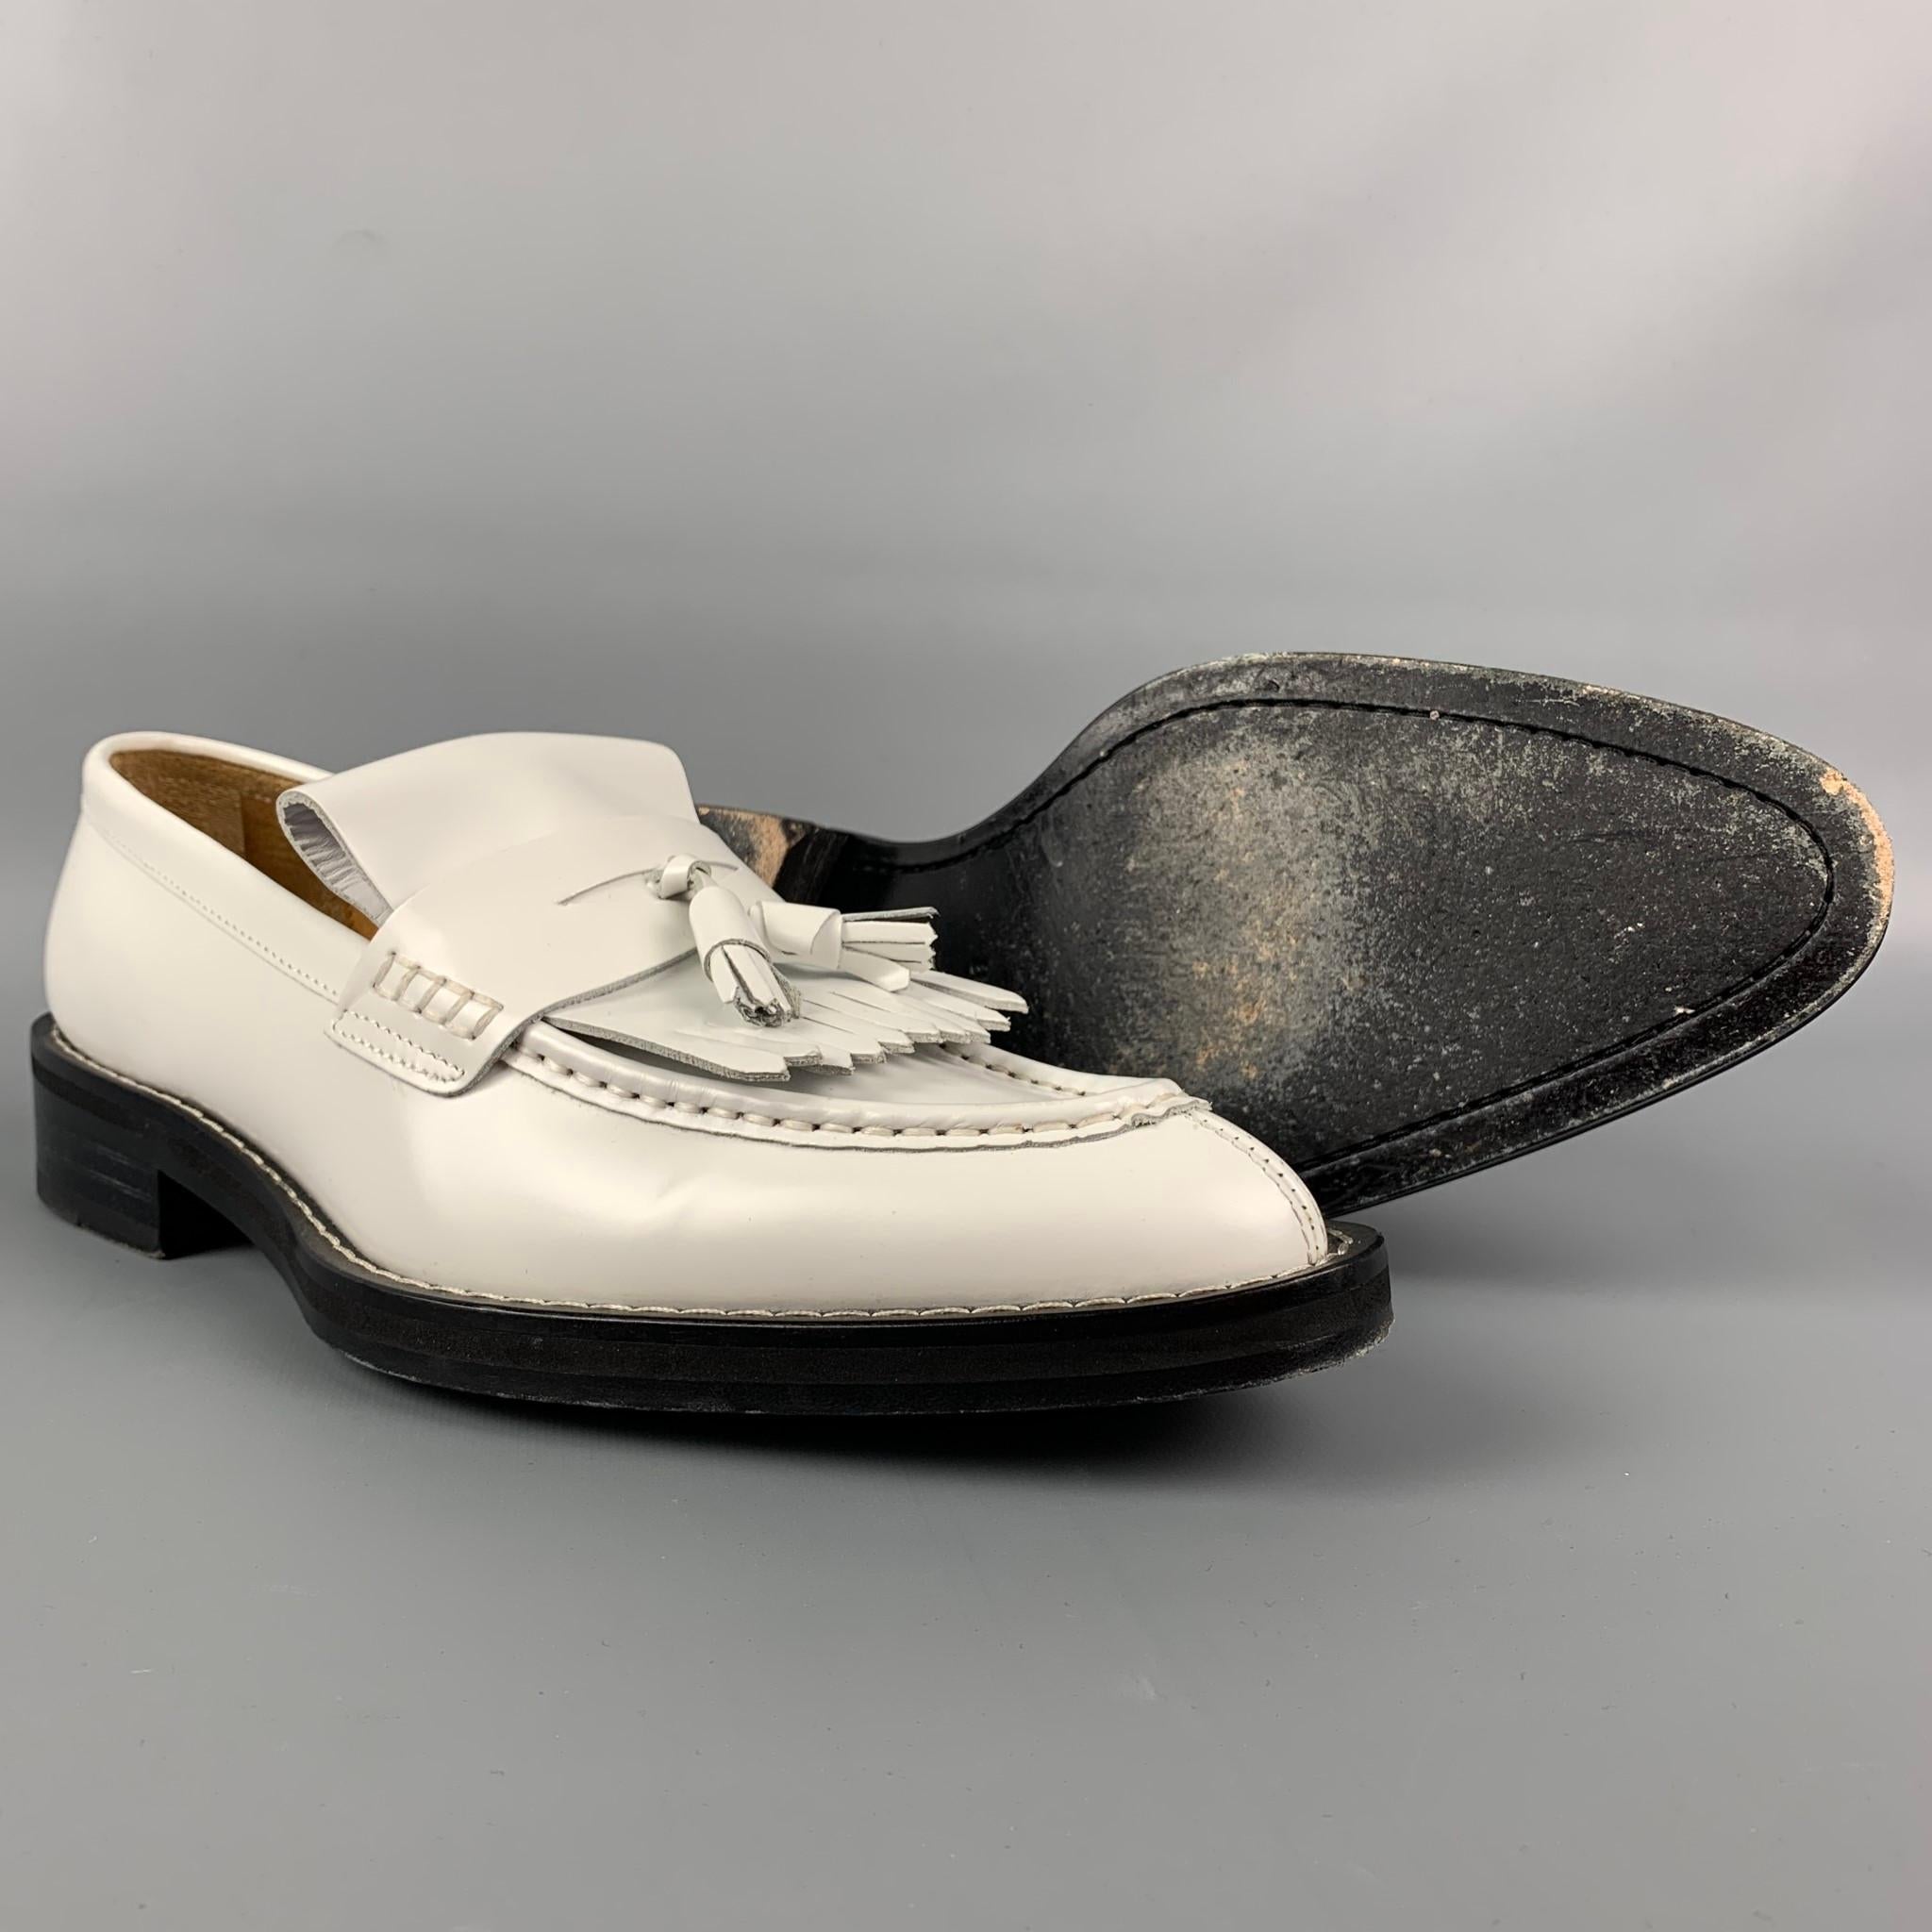 AMI by ALEXANDRE MATTIUSSI Size 9 White Leather Tassels Spazzo Moccasin Loafers 3